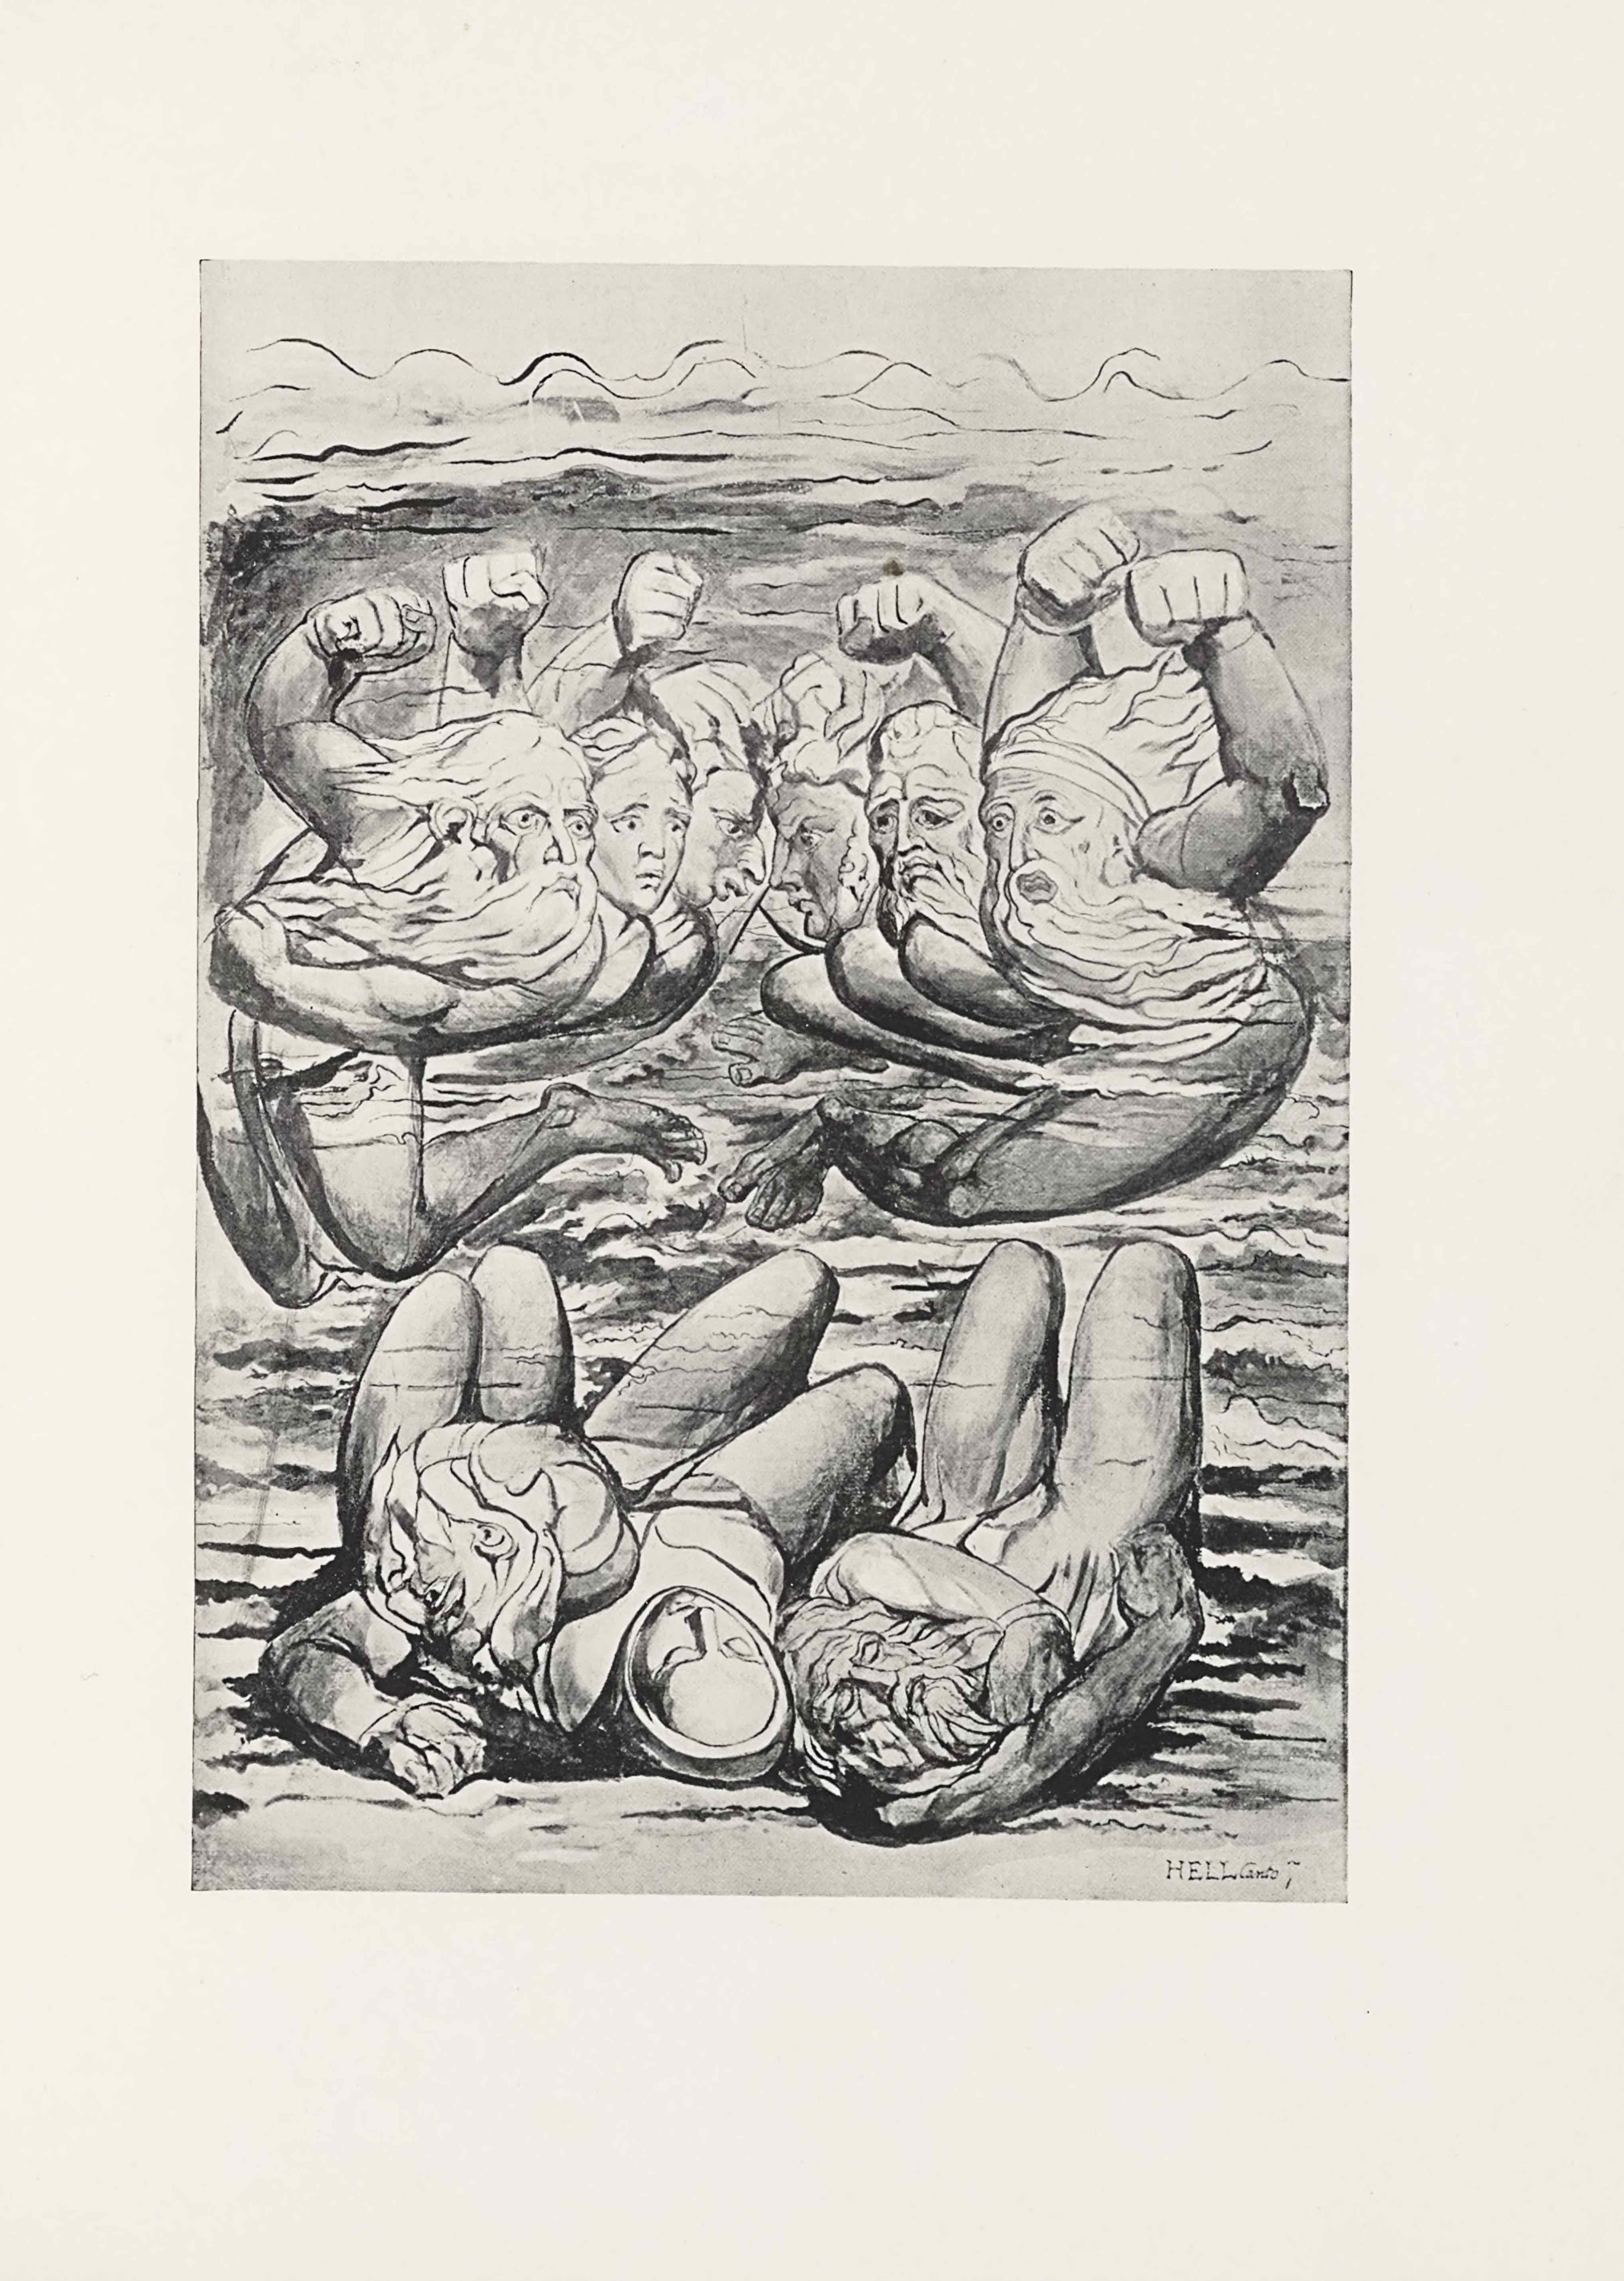 This half-tone reproduction of a water-colour drawing by William Blake for Dante’s Inferno is in portrait orientation. The image shows six figures in a line in the top two-thirds of the picture plane and three figures lying on their backs below in the bottom third. The three figures at the bottom are lying very close together, with their knees bent and the backs of their heads facing the viewer. The figure on the left has their left arm bent up with their hand resting above their head. The face is not visible, with only hair showing at the top of the head. The central figure is lying with their arms covered underneath the bodies of the two figures on either side. They have a head scarf wrapping tightly around the sides of their face. The figure’s eyes are closed. The figure on the right is a man with his head twisted far to the right and his bearded face visible by the viewer. The man’s eyes are closed. His left arm is wrapped across his body, with his hand tucked into his armpit. He has long hair that flows in waves around his head. The series of six figures at the top of the composition are floating above the three figures on the bottom. The six floating figures are a mirror image of each other in poses, with each figure’s outer arm raised up with a clenched fist. The figure on the far left is a man who has his body facing the left side, but his upper body twisted to face to the right. He has bare feet and bare legs that are translucent, giving way to the background coming through. He has his right arm raised in a fist, and his left arm is reaching across his body. He has a long wavy beard and long hair on his head. Slightly to his right and backgrounded is the second figure. This figure is limitedly visible, showing only a raised right fist and a face with a crease between the eyebrows, and a mouth opened in an “O” shape. To the right of this figure and slightly backgrounded is the third figure. This figure has the right fist raised as well, and only the face visible. This figure is visible only in profile. The figure has large lips that are extended far out from the face. The figure also has a long and protruding nose. To the right of this figure, and equally backgrounded, is a figure also visible only in profile, but turned to face to the left and staring directly at the opposition. This figure has the left fist raised and clenched. The figure has downturned lips and a crease between the eyebrows. To the right and slightly foregrounded is another figure with the left fist raised. This figure has a wavy beard and matching hair, both long. The figure has slightly downturned lips and large pupils. The figure is looking off into the distant left of the page, with a crease between the eyebrows. To the right and foregrounded is the sixth figure. This figure has his whole body visible. The figure has his left fist raised and his legs are sticking out towards the centre of the composition. He has a long wavy beard and hair, which covers up his whole upper body. He has wide eyes and raised eyebrows. His mouth is in an “O” shape. In the background of all of the figures on the page is a series of horizontal wavy lines, in wave-like shapes in the bottom half. In the upper half the lines become less wavy and look like air waves in the sky. Between the lines is dark shading until the top fifth of the page where the background becomes much lighter. In the bottom right corner there is the text: “HELL Canto 7”.